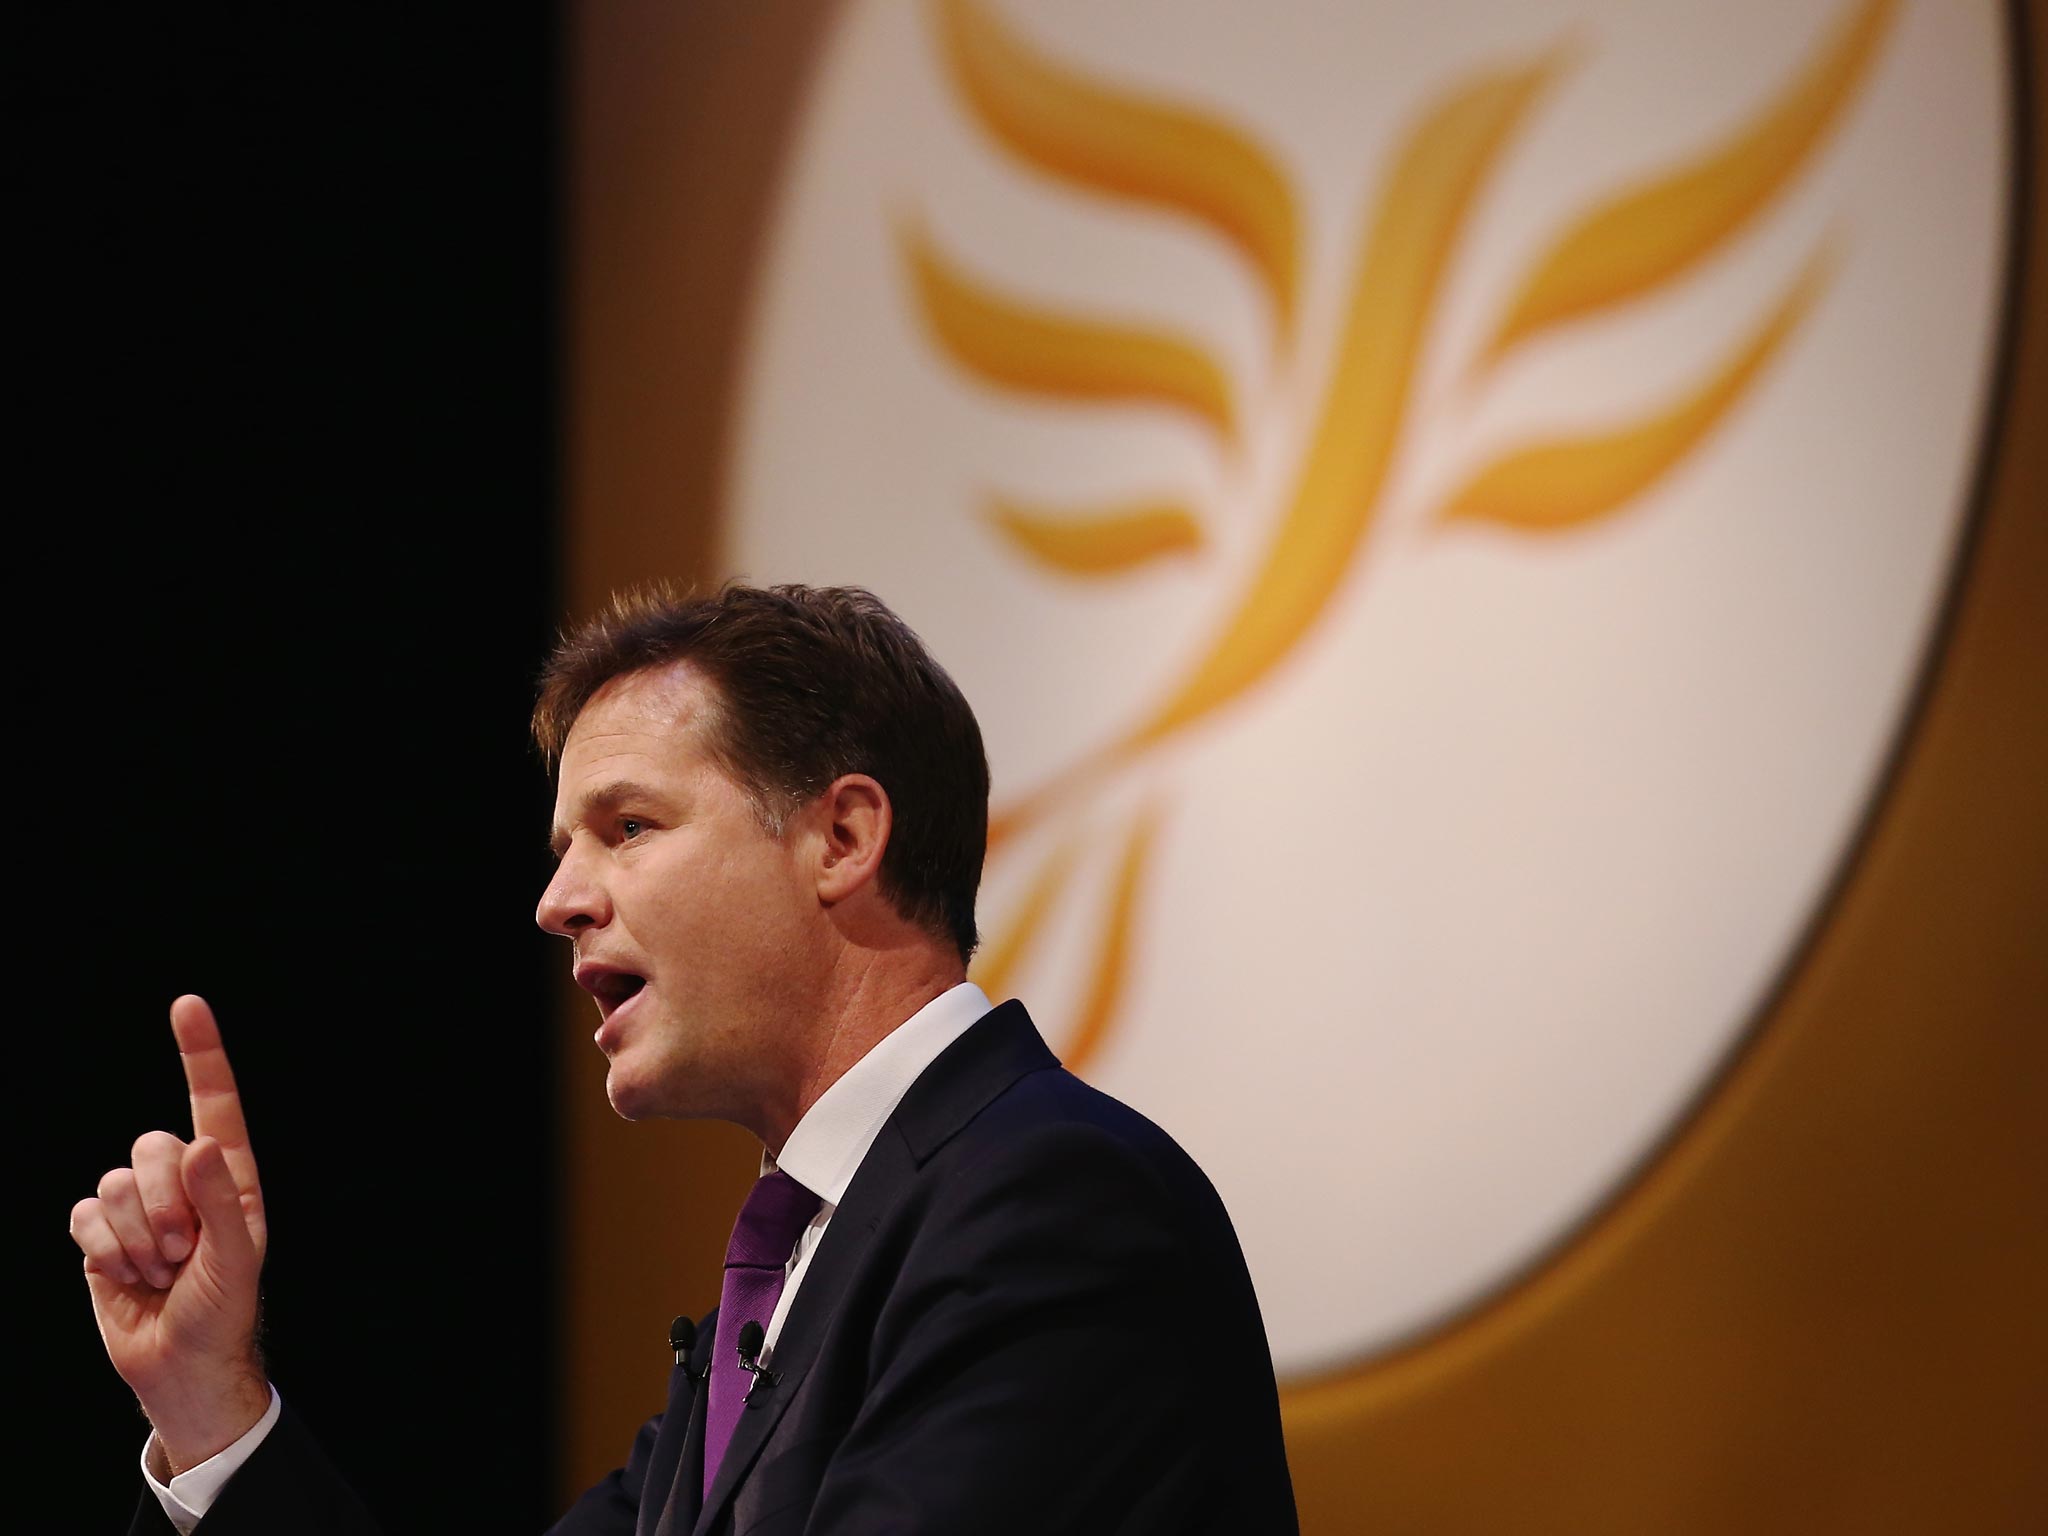 According to Nick Clegg, the electorate are warming to a coalition government